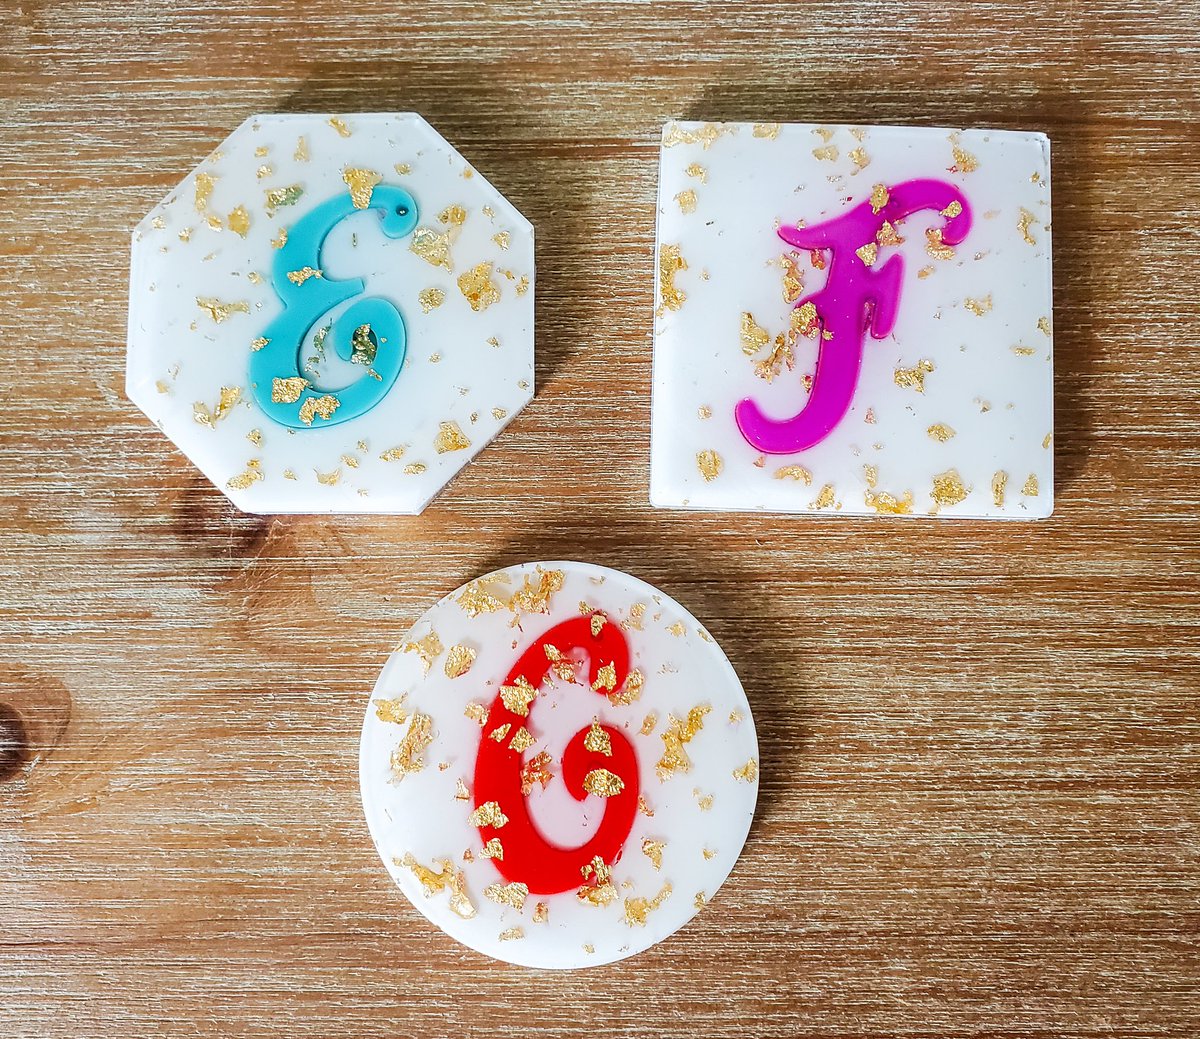 Personalized Initial Resin Coasters 🌈✨️☕️ 
etsy.com/listing/150728…
#EtsySeller #HandmadeHour #giftideas #giftsforher #giftsforhim #womaninbizhour #SummerVibes #ColorfulArtworks #resinart #resin #CoffeeLover #coasters #uniquegifts #personalized #FridayFeeling #FridayVibes